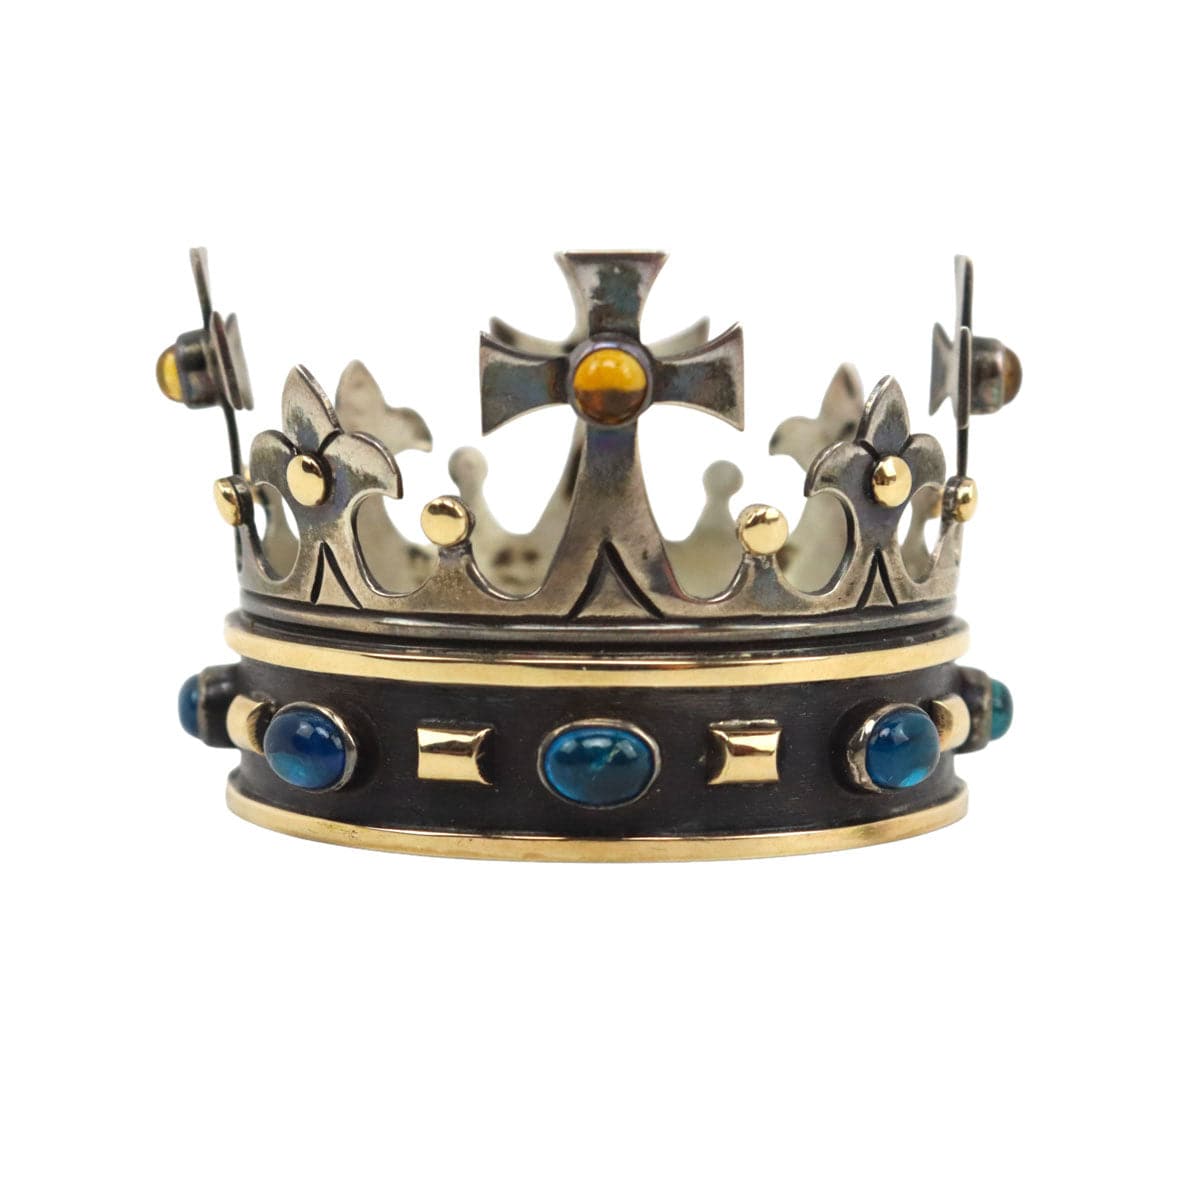 Frank Patania Jr. - Sapphire, Citrine, 14K Gold, and Silver Crown, 1.3